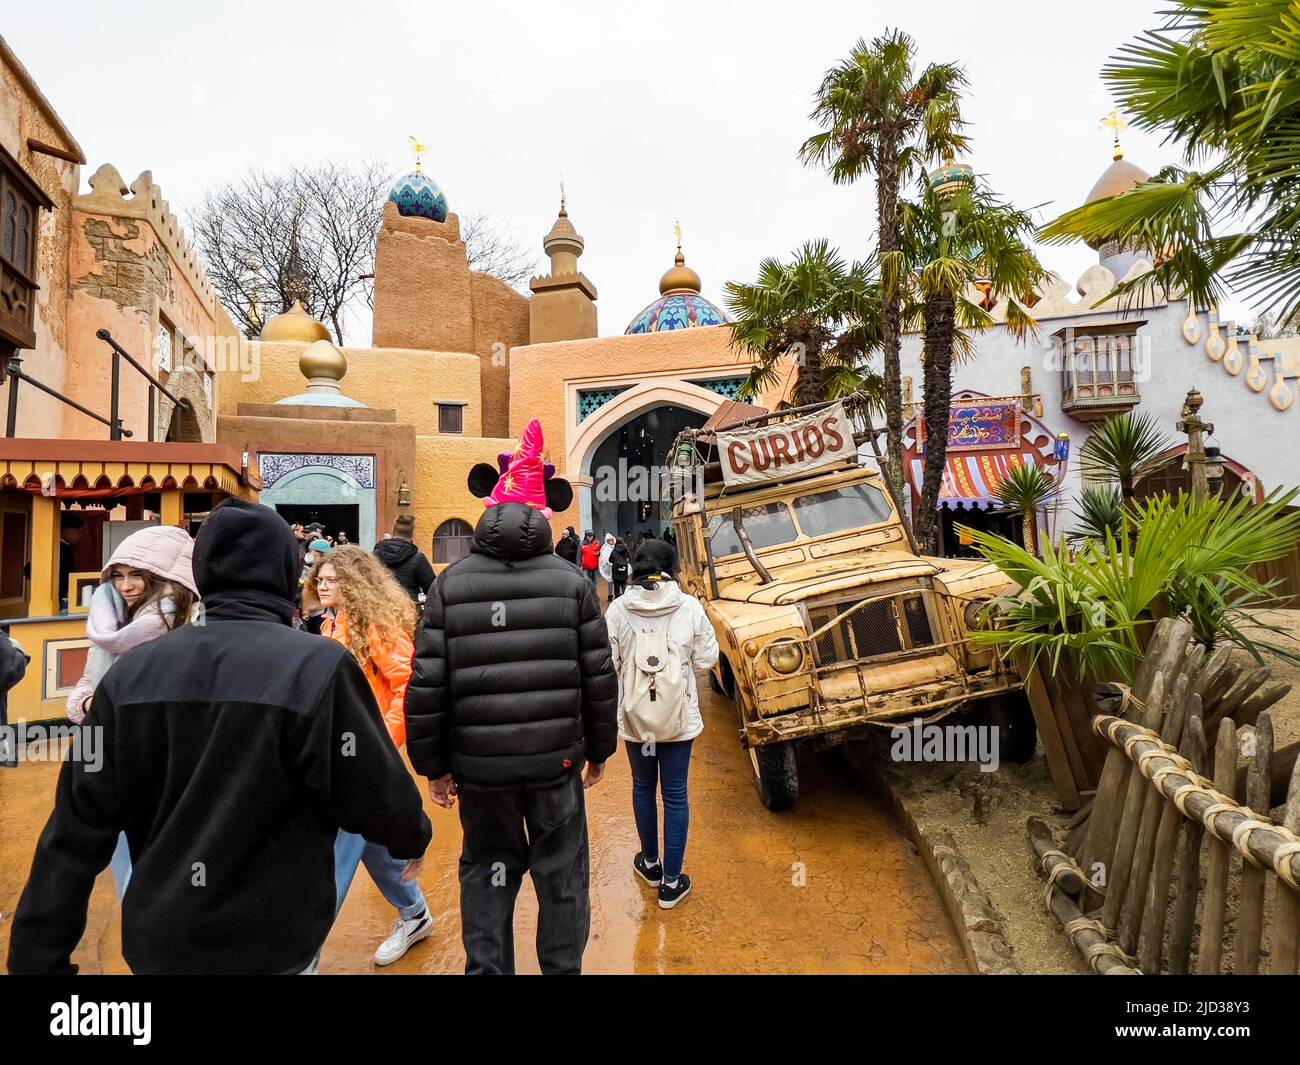 Paris, France - 04/05/2022: Desert scene of rides and places of Disneyland Paris. Very successful designs from movie moments. Stock Photo